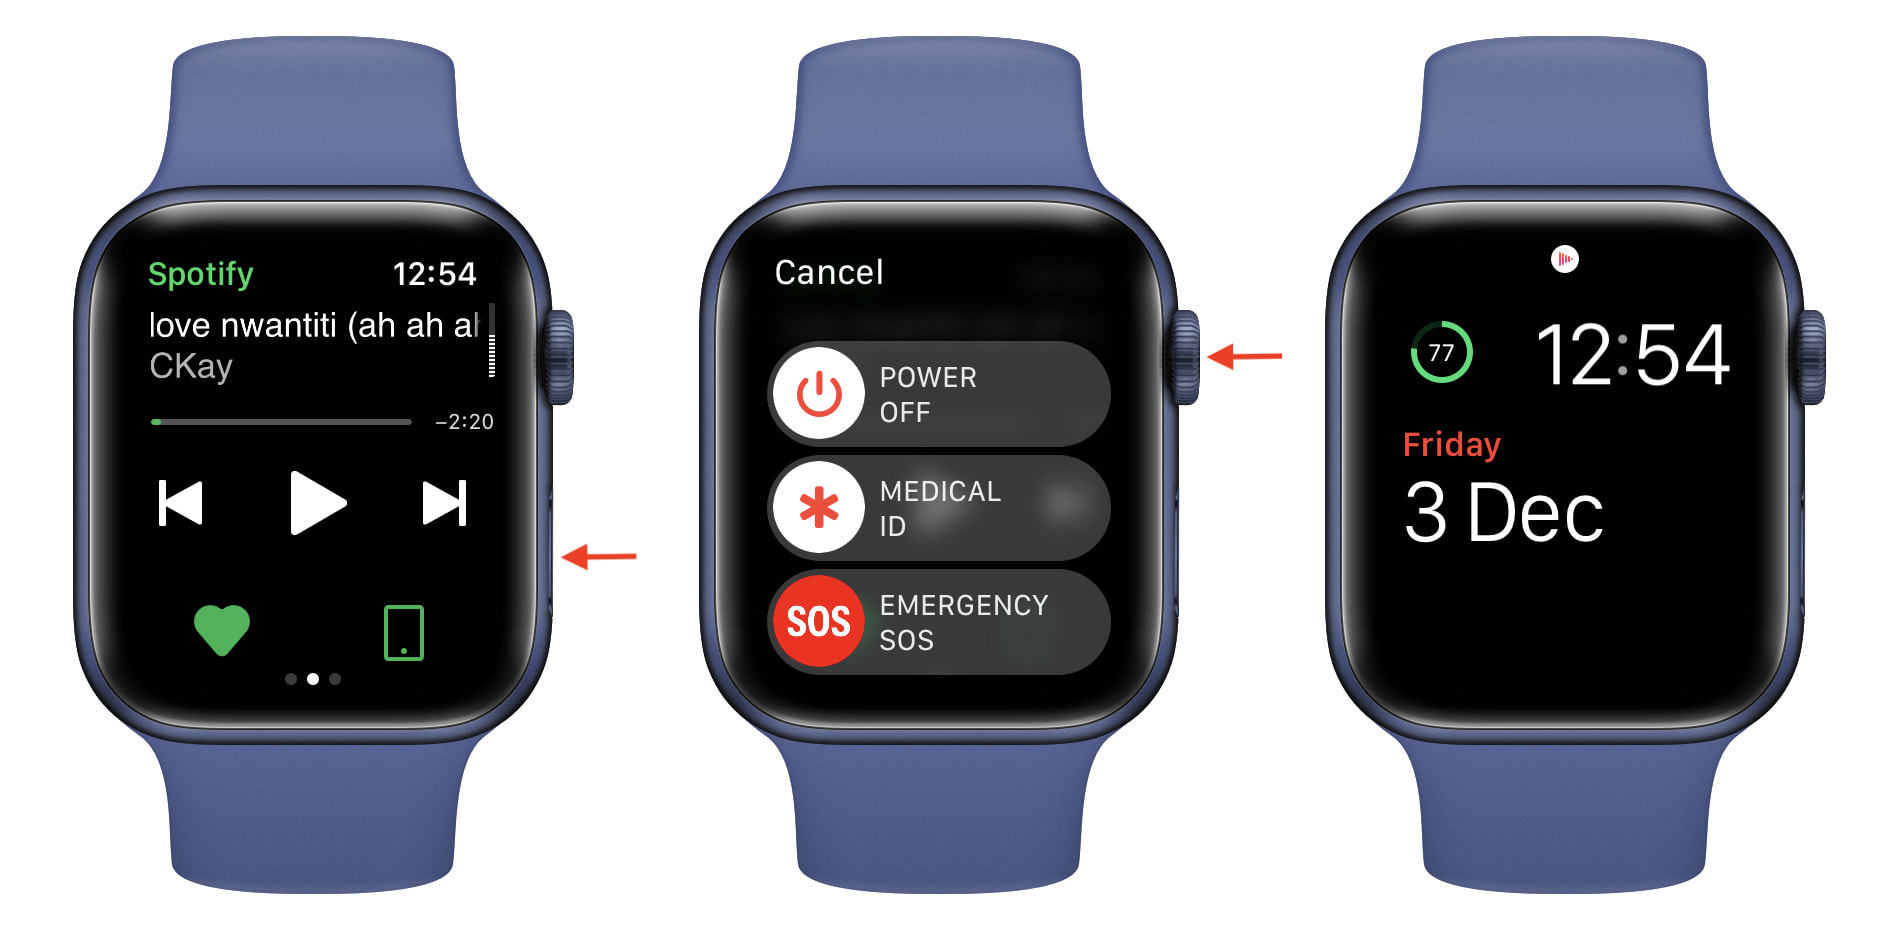 Force quit apps on Apple Watch